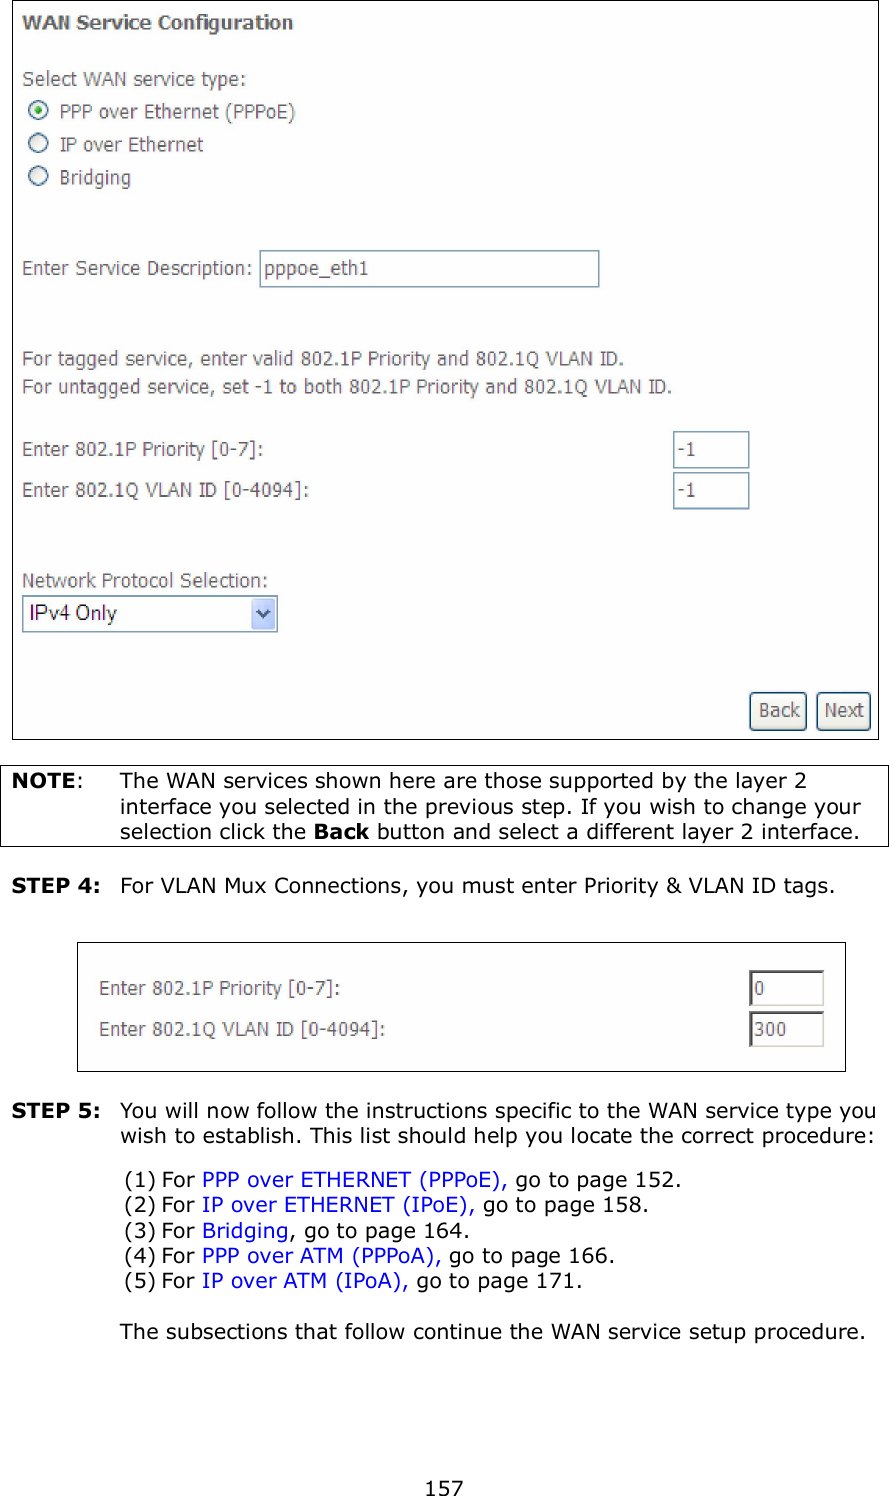  157   NOTE:  The WAN services shown here are those supported by the layer 2 interface you selected in the previous step. If you wish to change your selection click the Back button and select a different layer 2 interface.  STEP 4:  For VLAN Mux Connections, you must enter Priority &amp; VLAN ID tags.    STEP 5:  You will now follow the instructions specific to the WAN service type you wish to establish. This list should help you locate the correct procedure: (1) For PPP over ETHERNET (PPPoE), go to page 152. (2) For IP over ETHERNET (IPoE), go to page 158. (3) For Bridging, go to page 164. (4) For PPP over ATM (PPPoA), go to page 166. (5) For IP over ATM (IPoA), go to page 171.      The subsections that follow continue the WAN service setup procedure.     